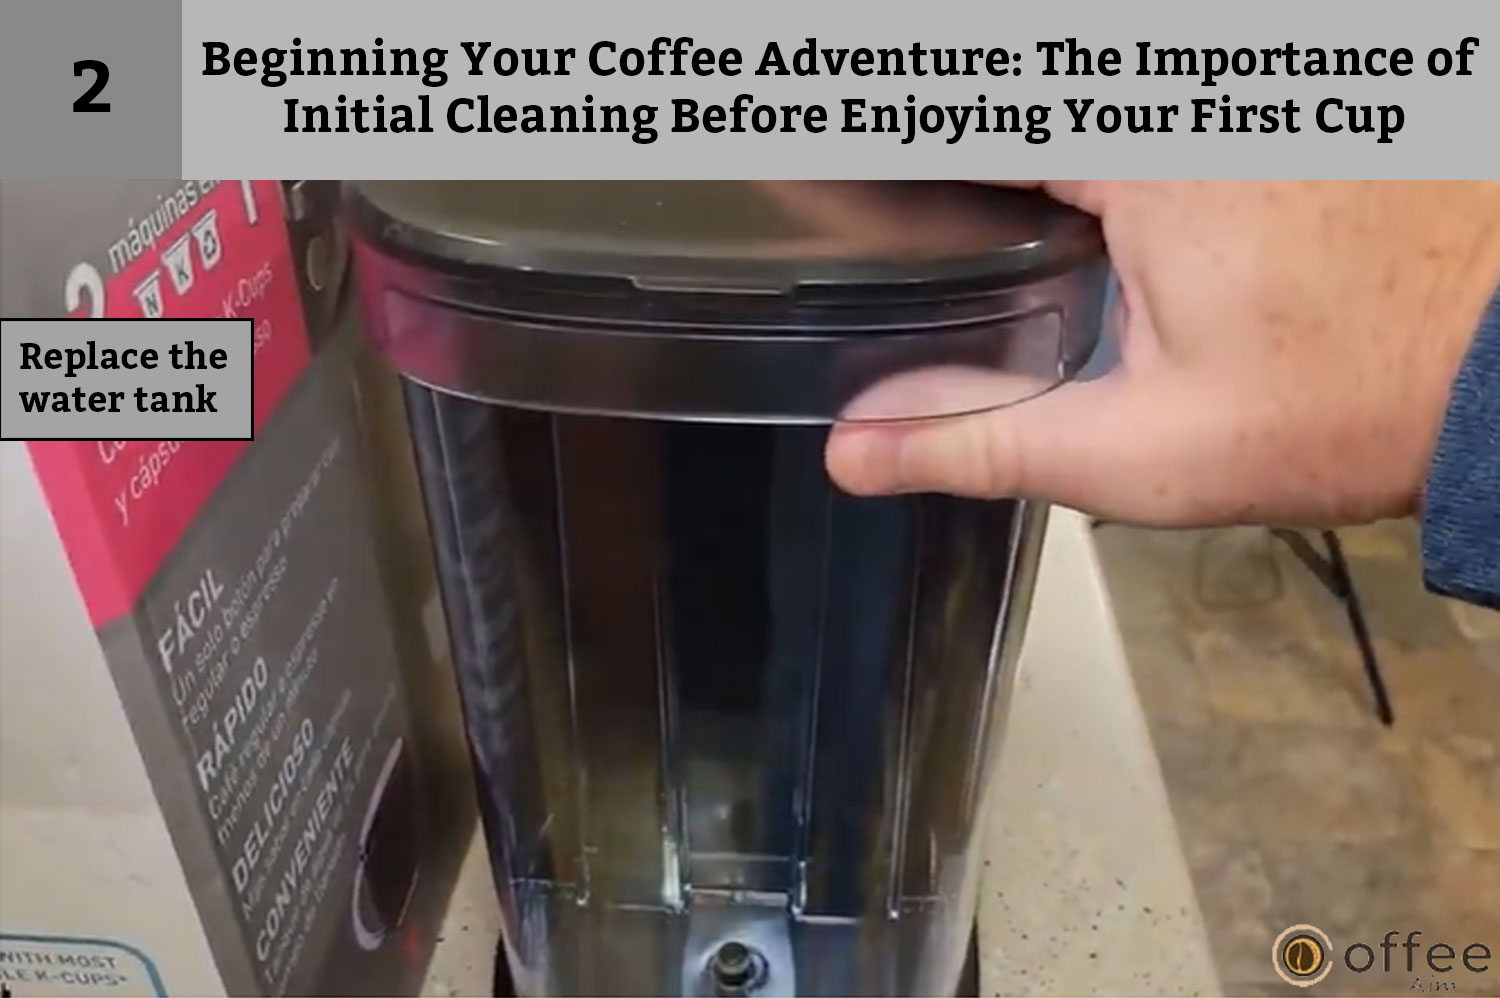 
This image demonstrates the process of "Replacing the Water Tank" in the guide titled "Beginning Your Coffee Adventure: How to Connect Nespresso Vertuo Creatista Machine."